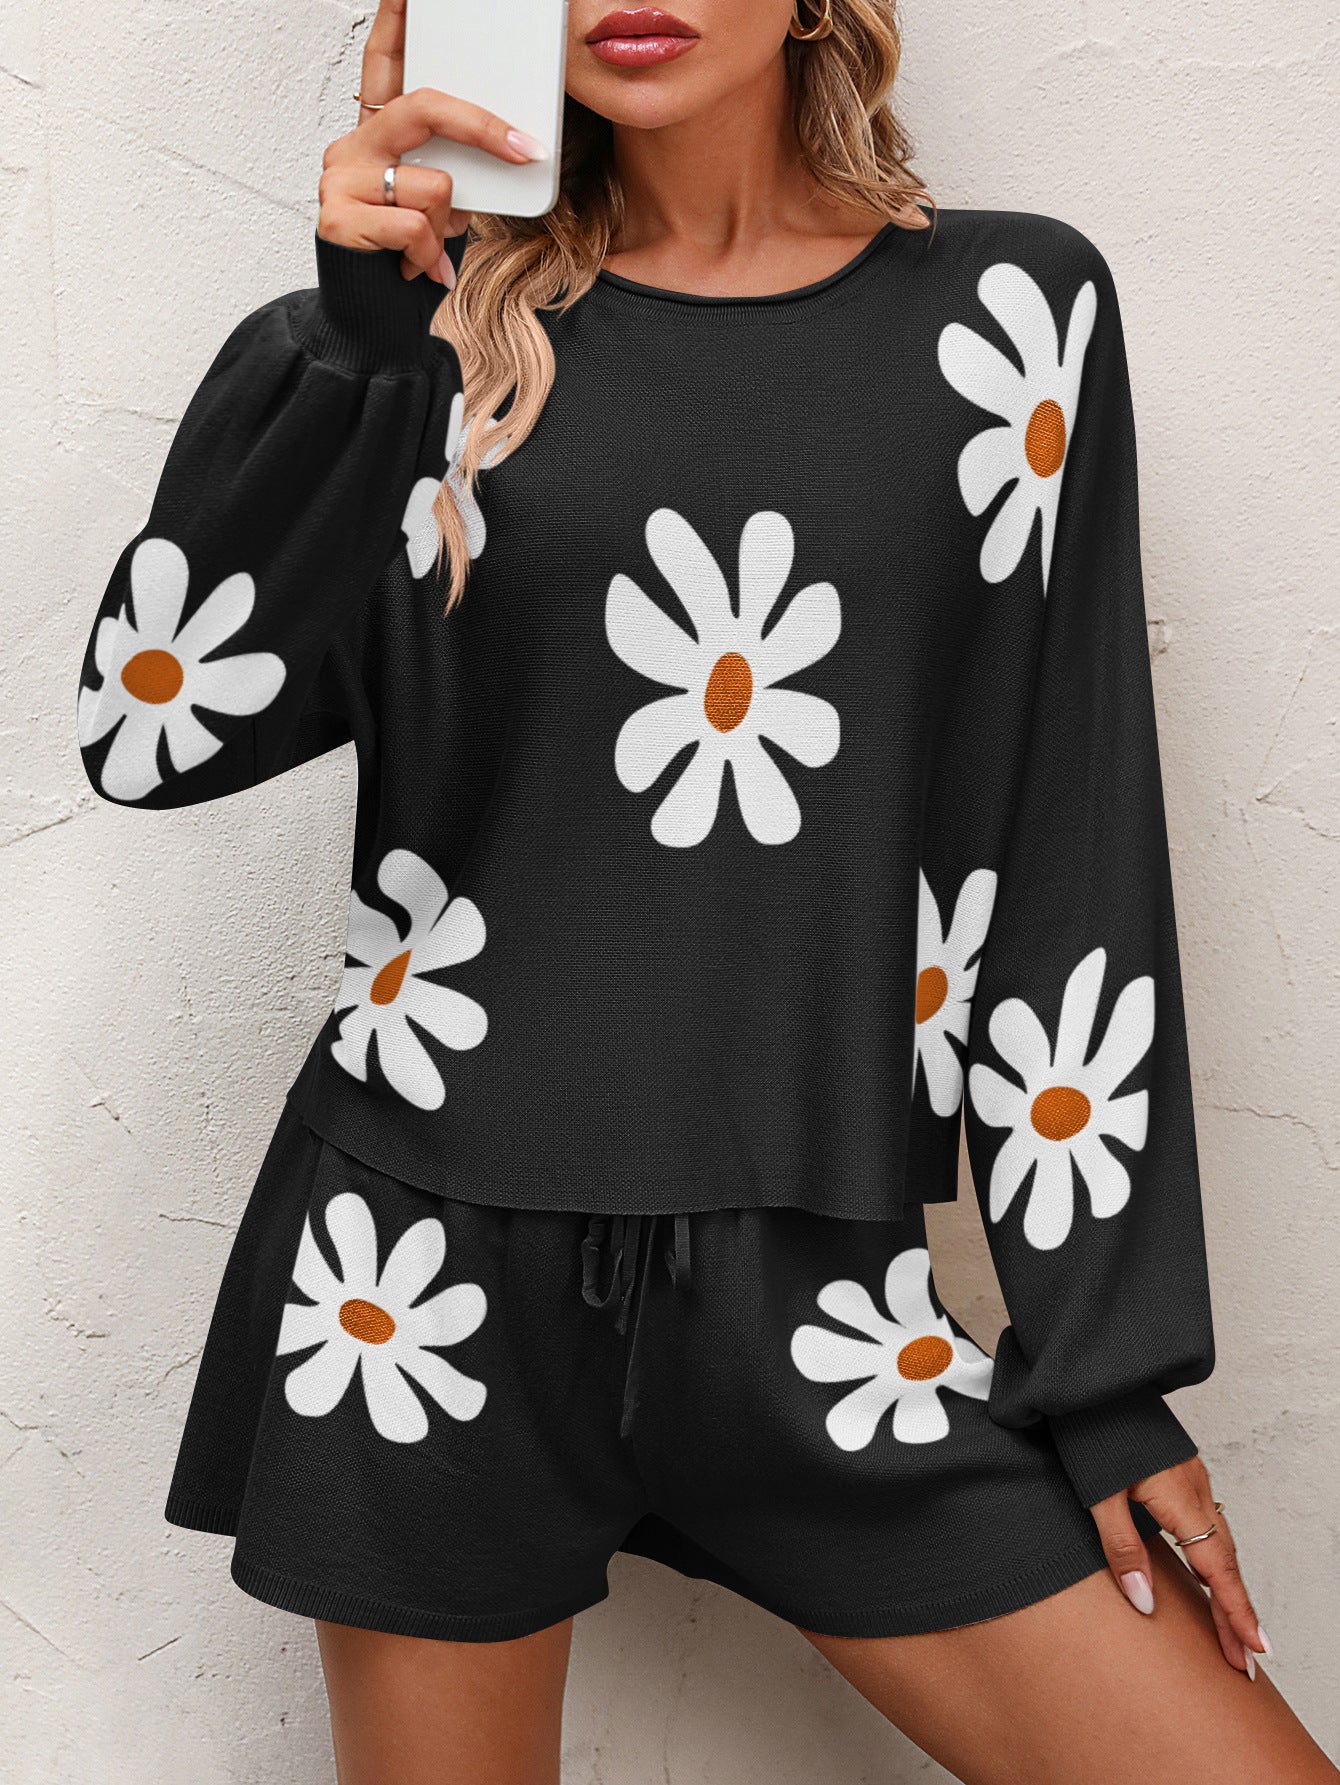 Floral Print Raglan Sleeve Knit Top and Tie Front Sweater Shorts Set free shipping -Oh Em Gee Boutique